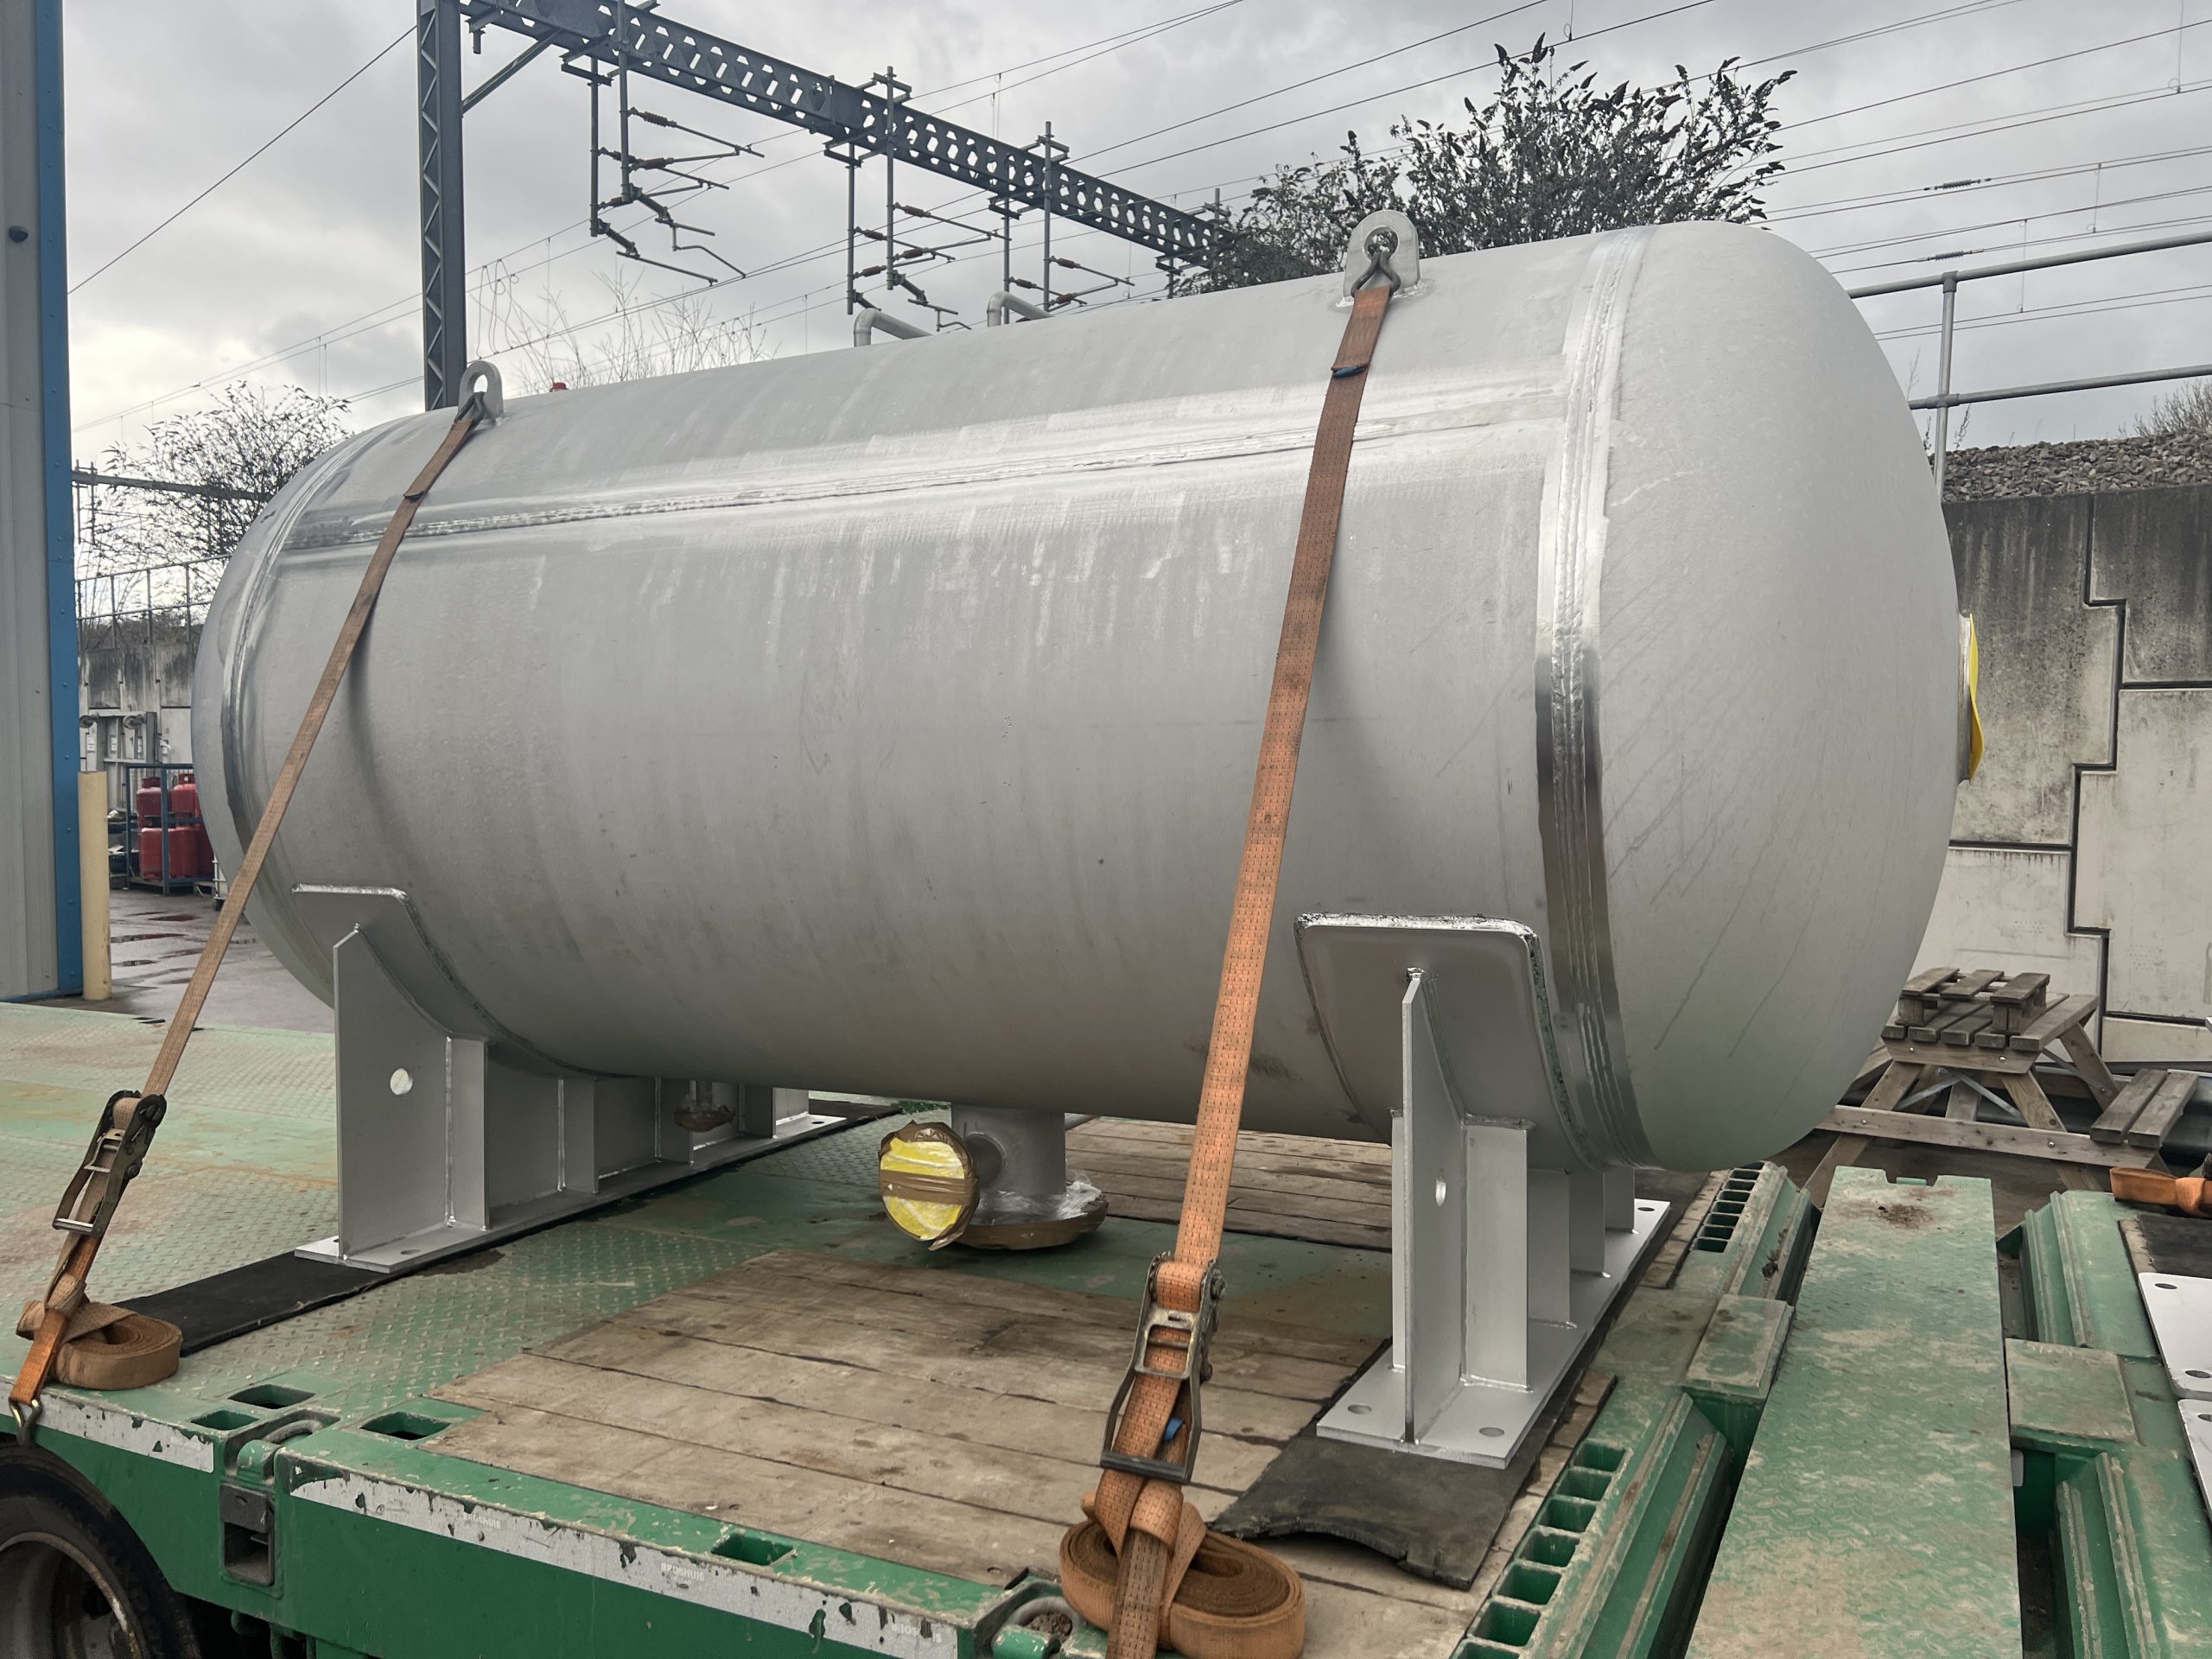 Stainless steel surge vessel for the uk water industry